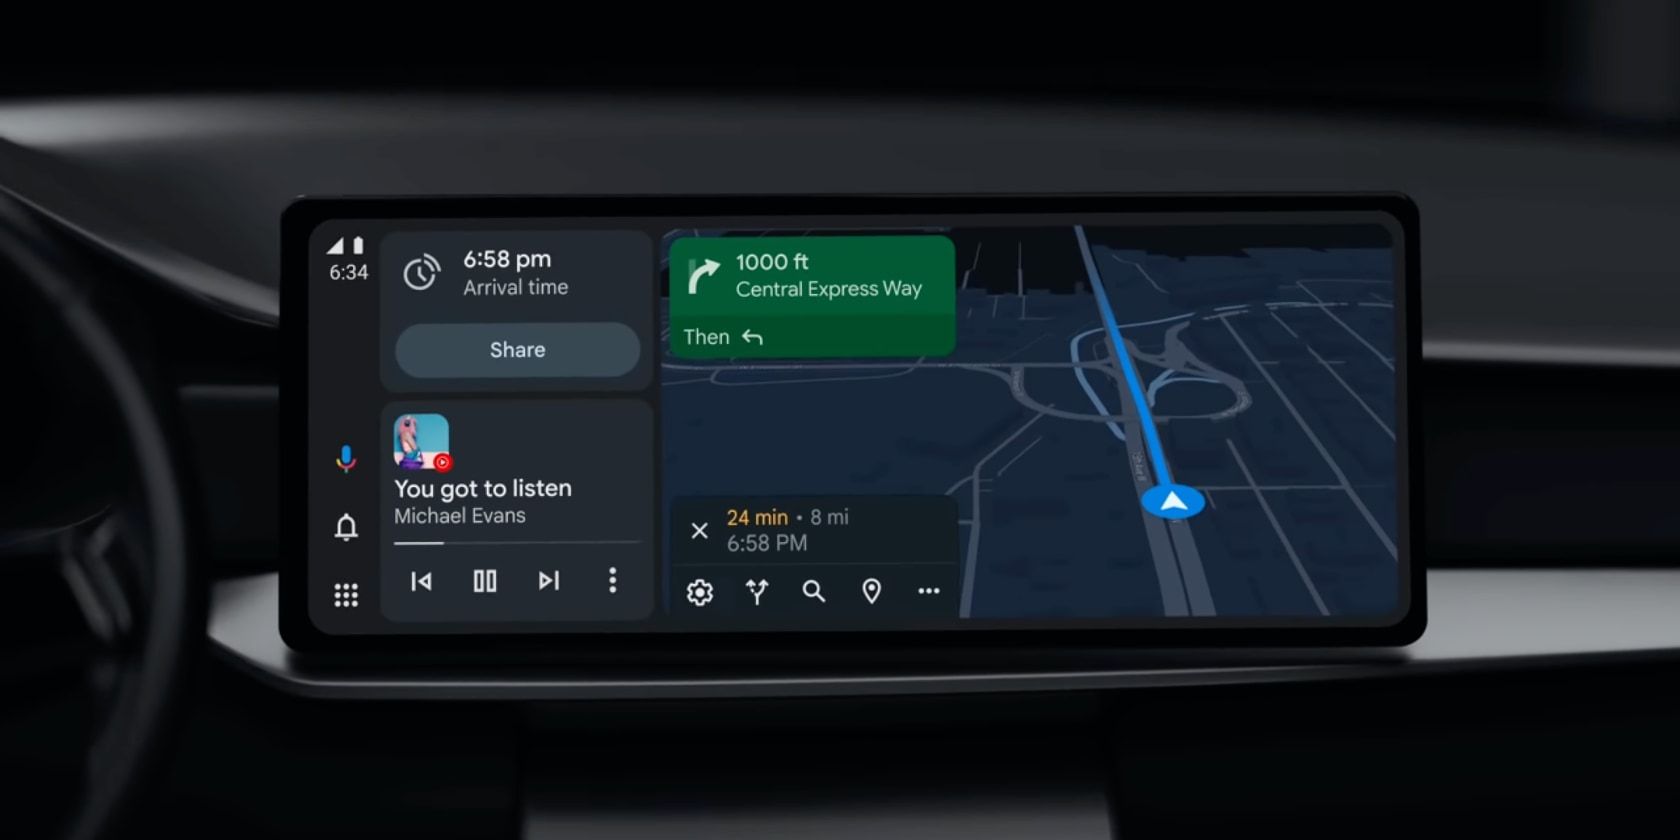 Google refreshes Android Auto with new features and a darker look